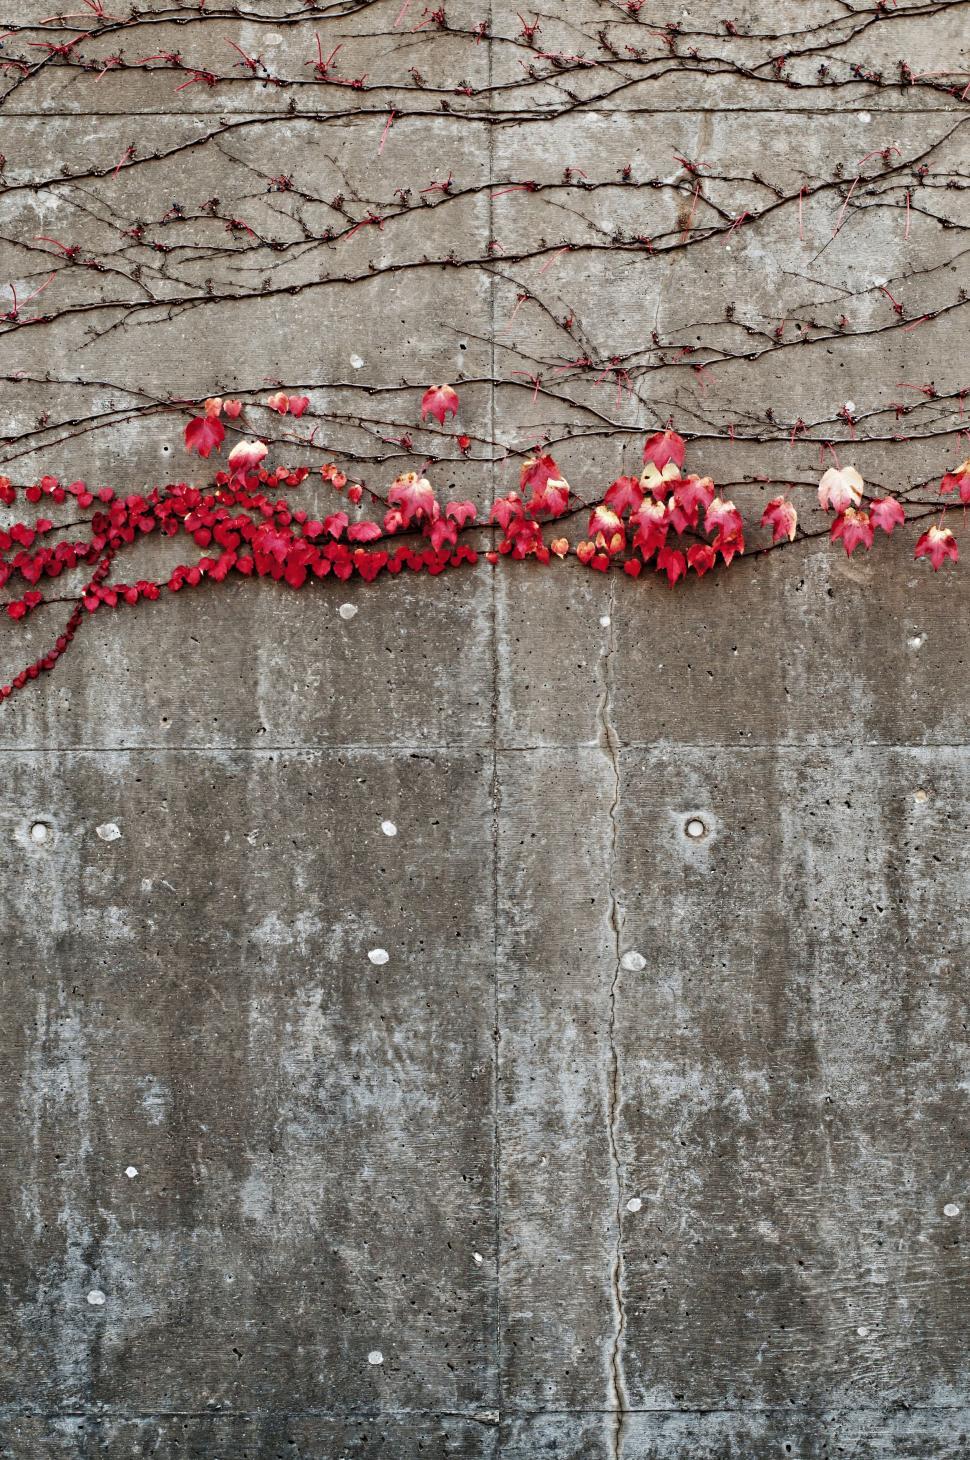 Free Image of Ivy Growing On Concrete Wall 